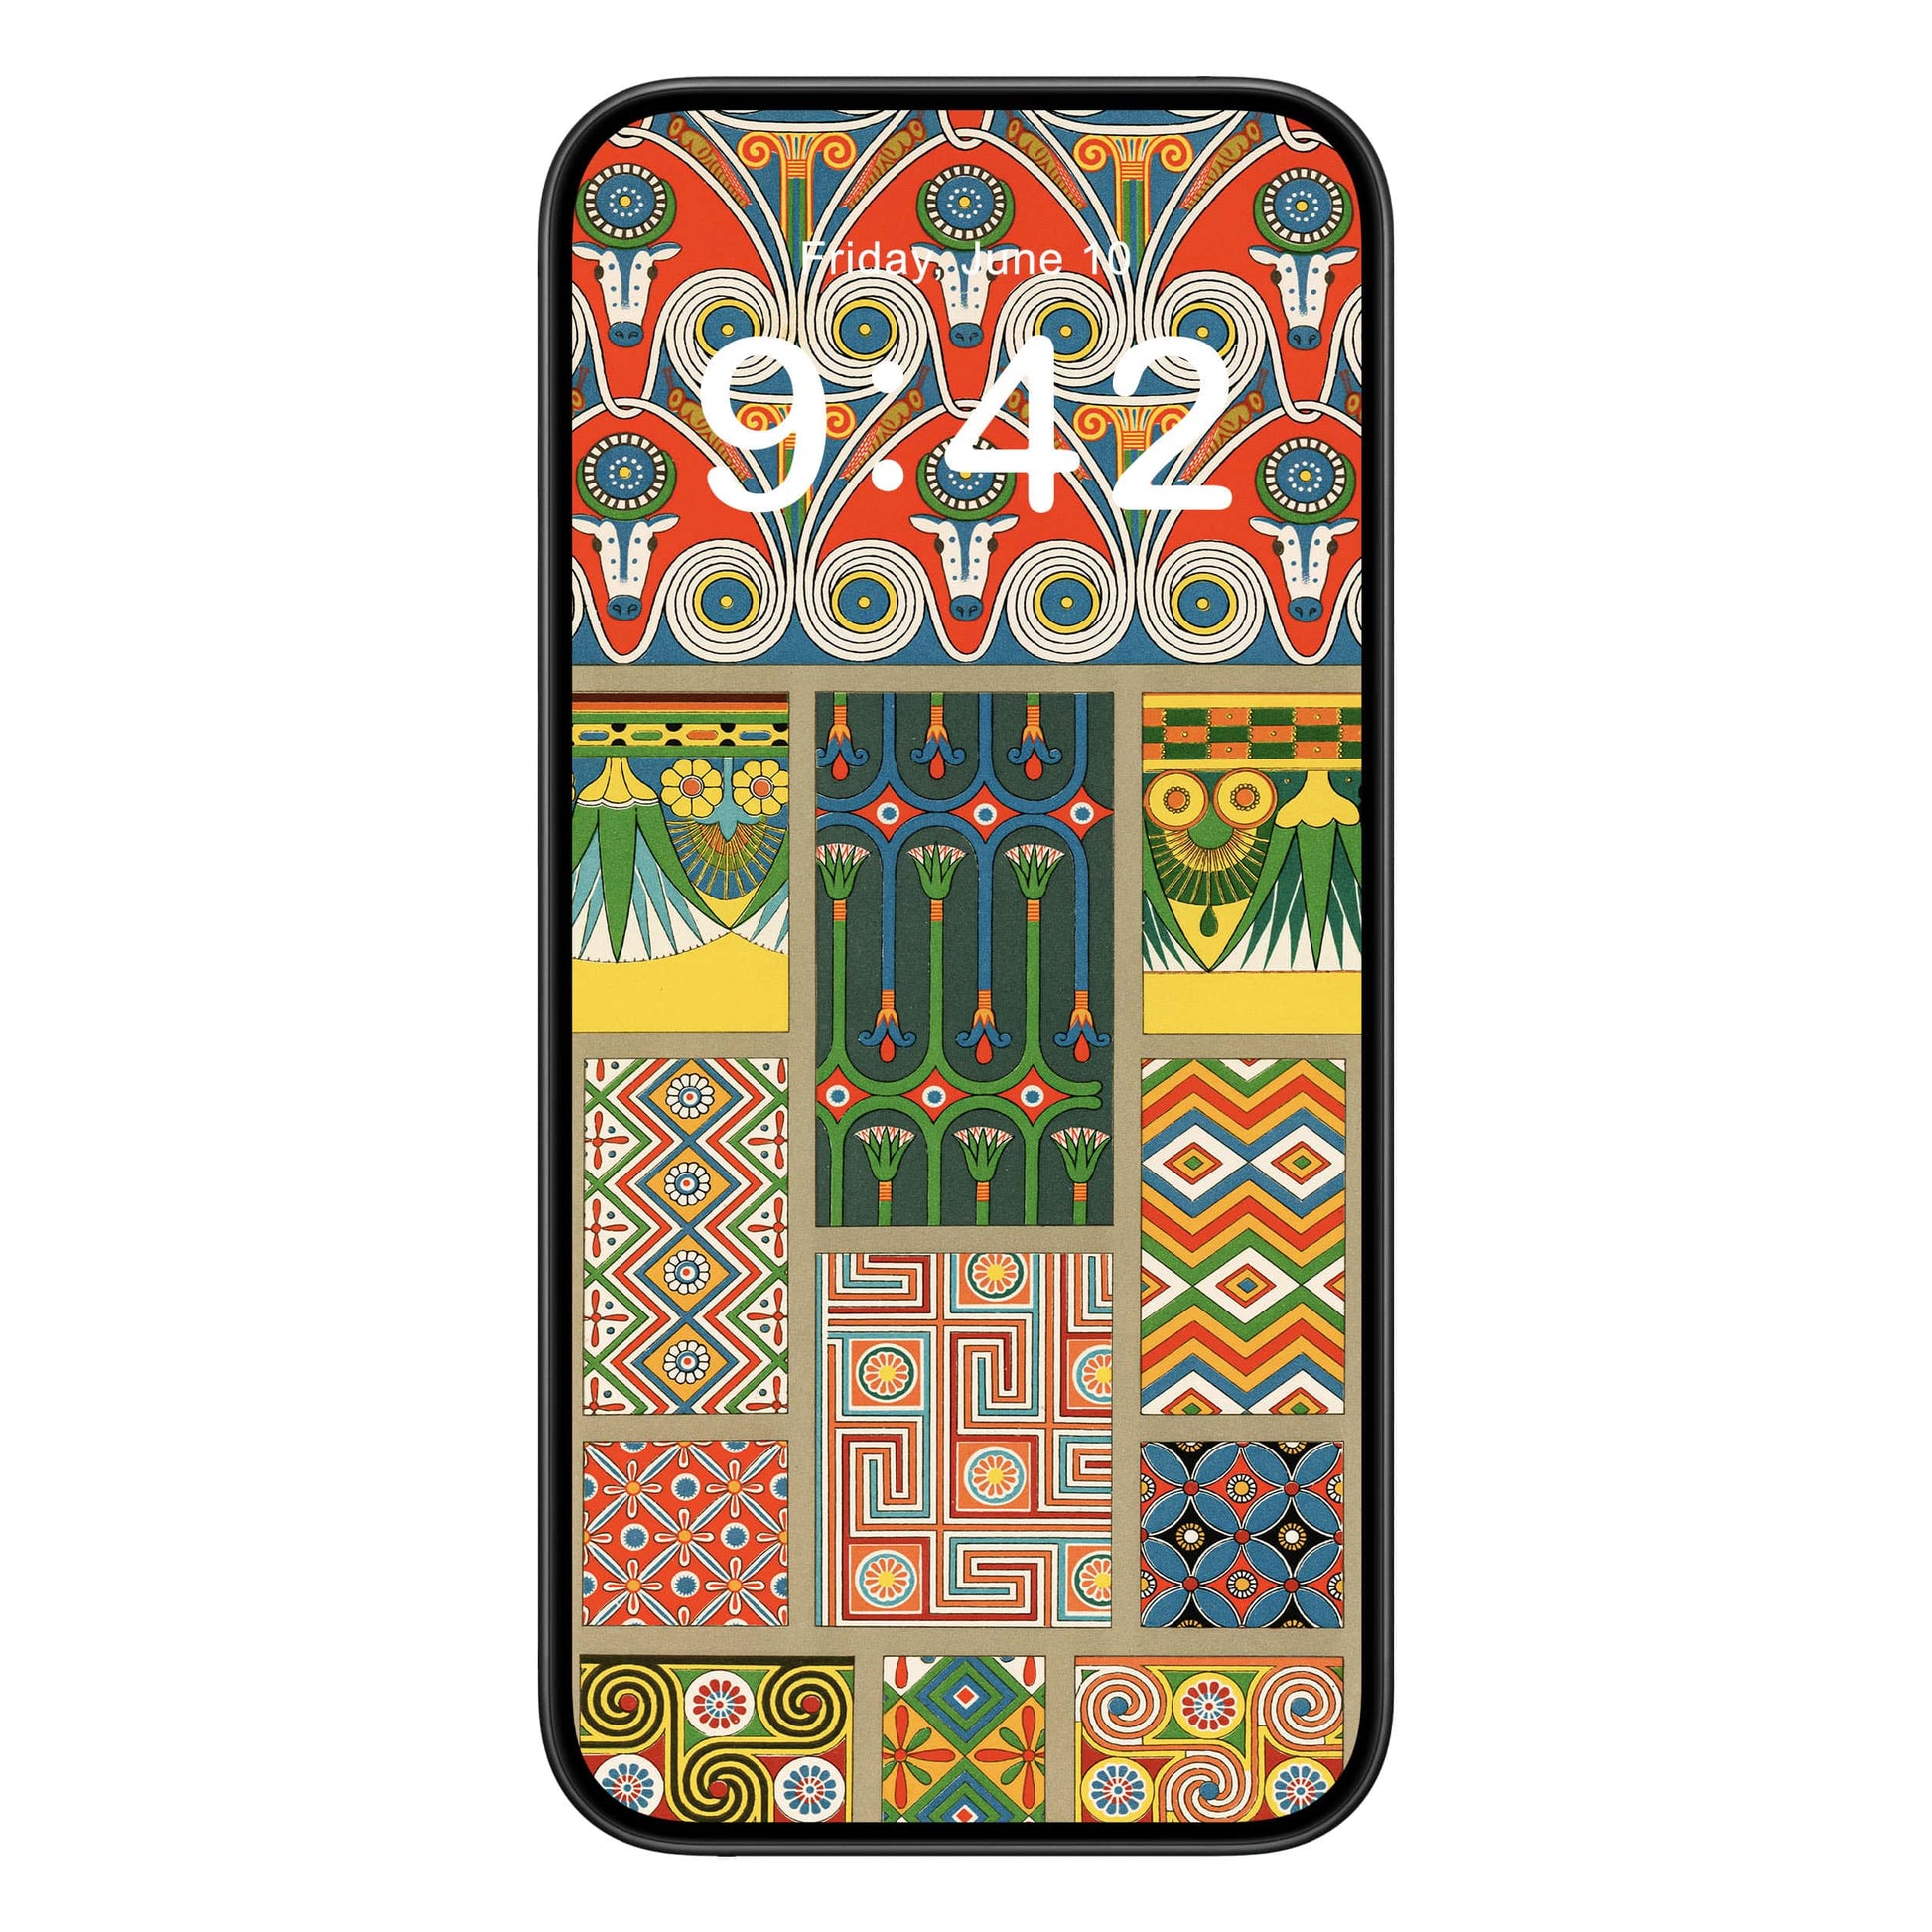 Unique Designs phone wallpaper background with egyptian patterns design shown on a phone lock screen, instant download available.